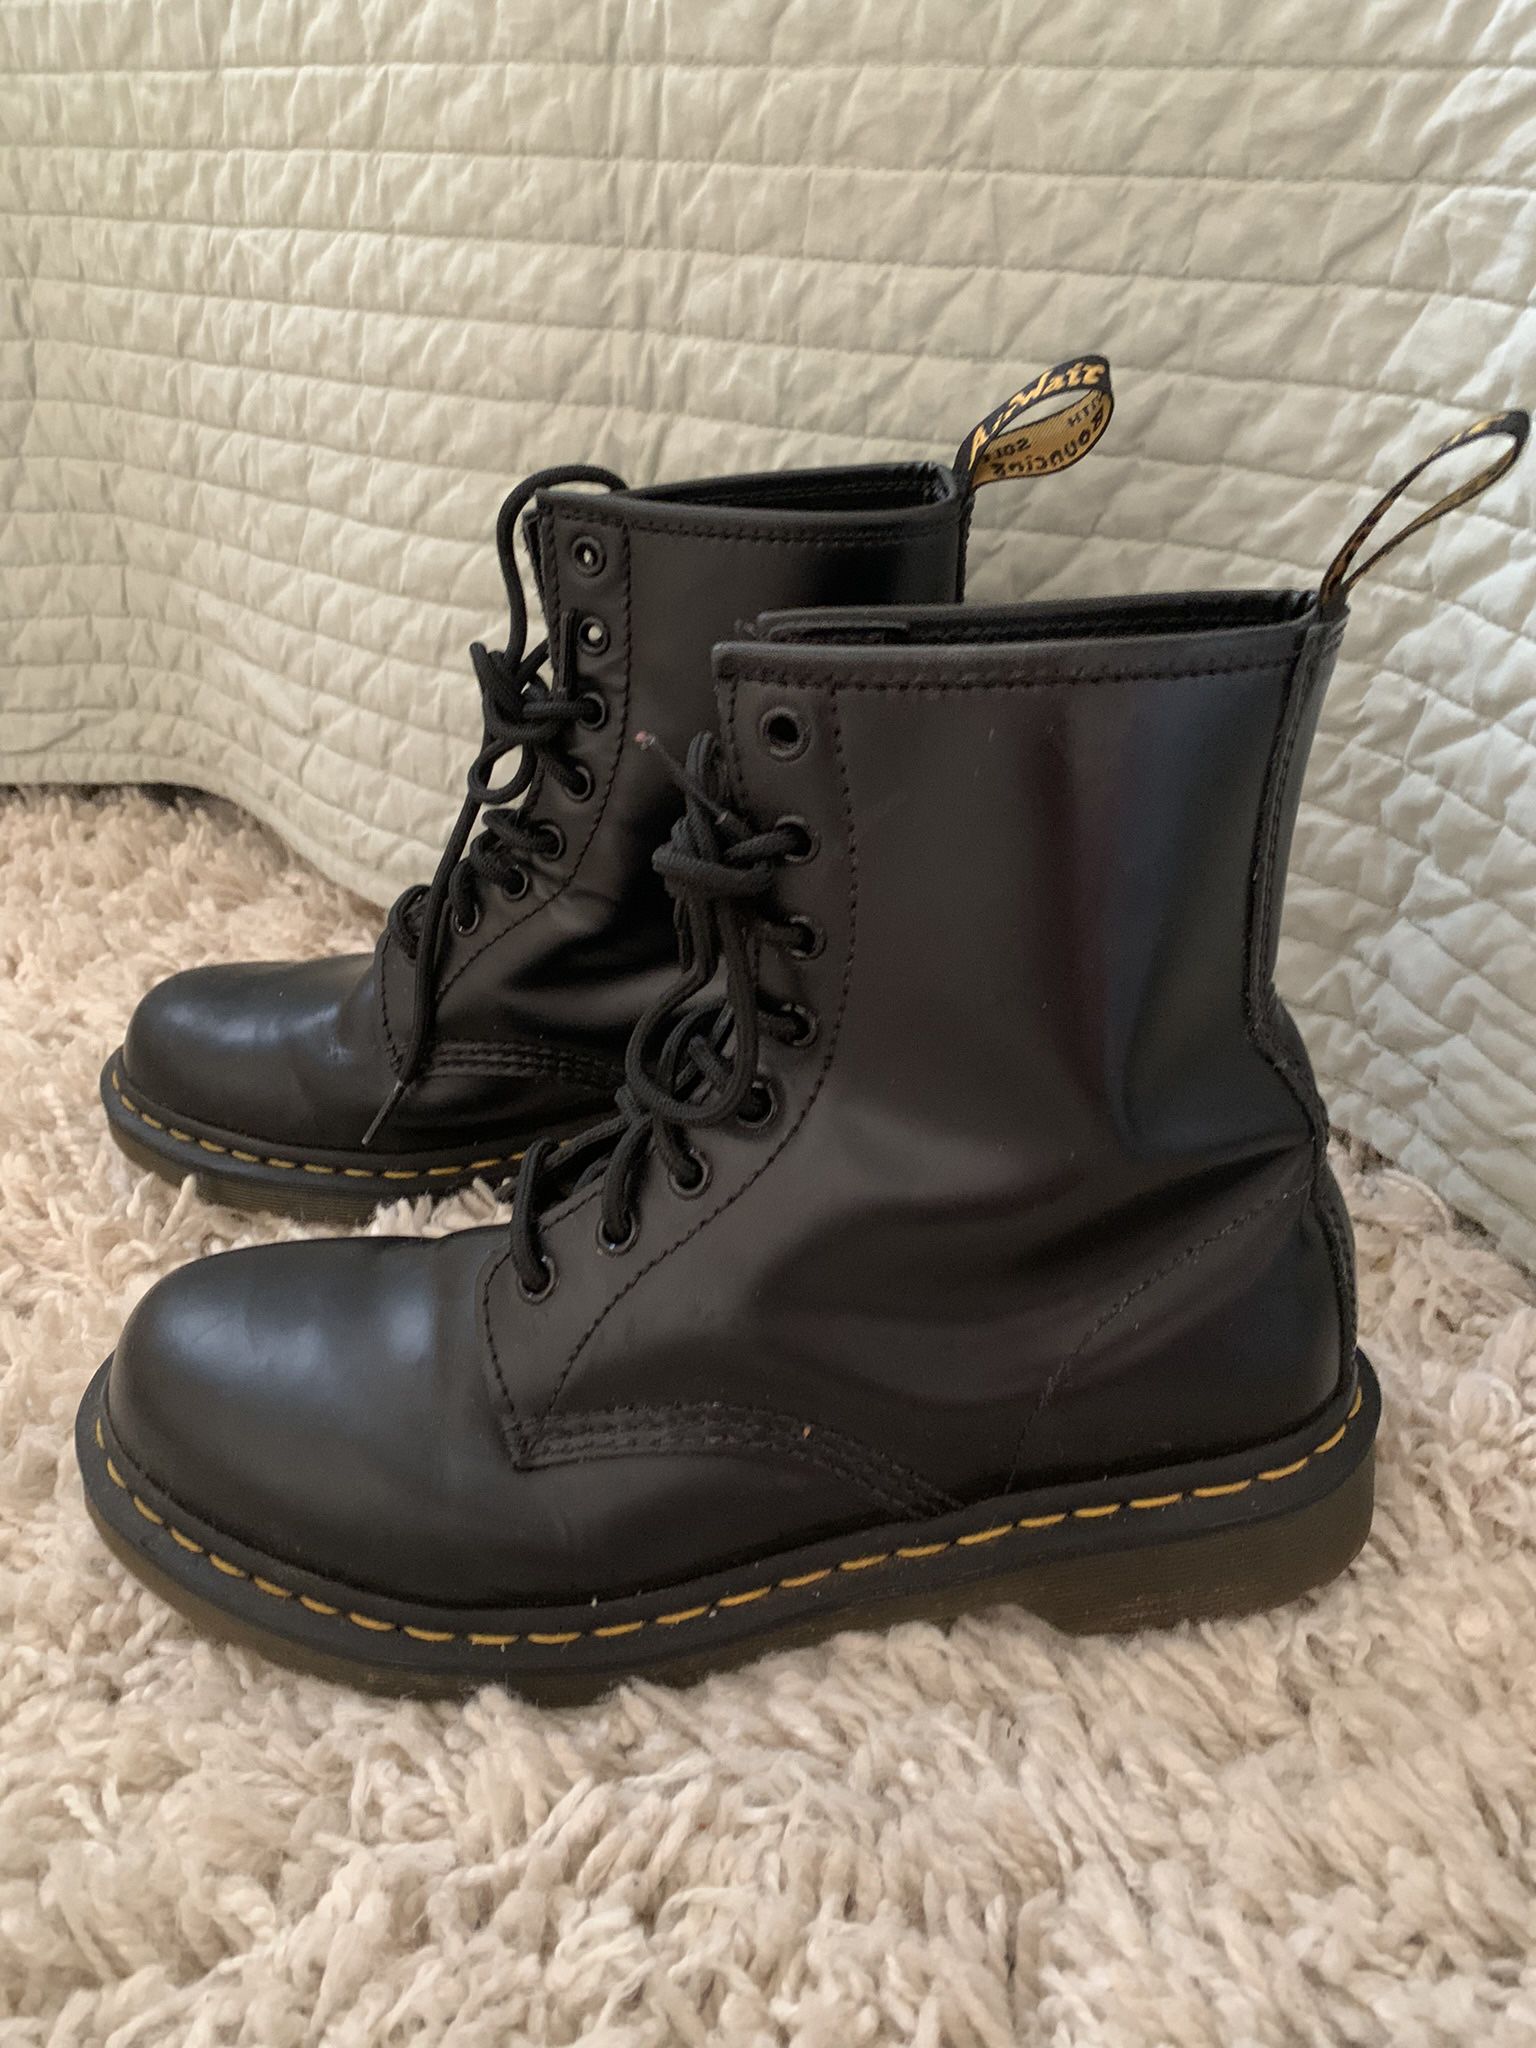 Women’s size 10.5 mid rise boots